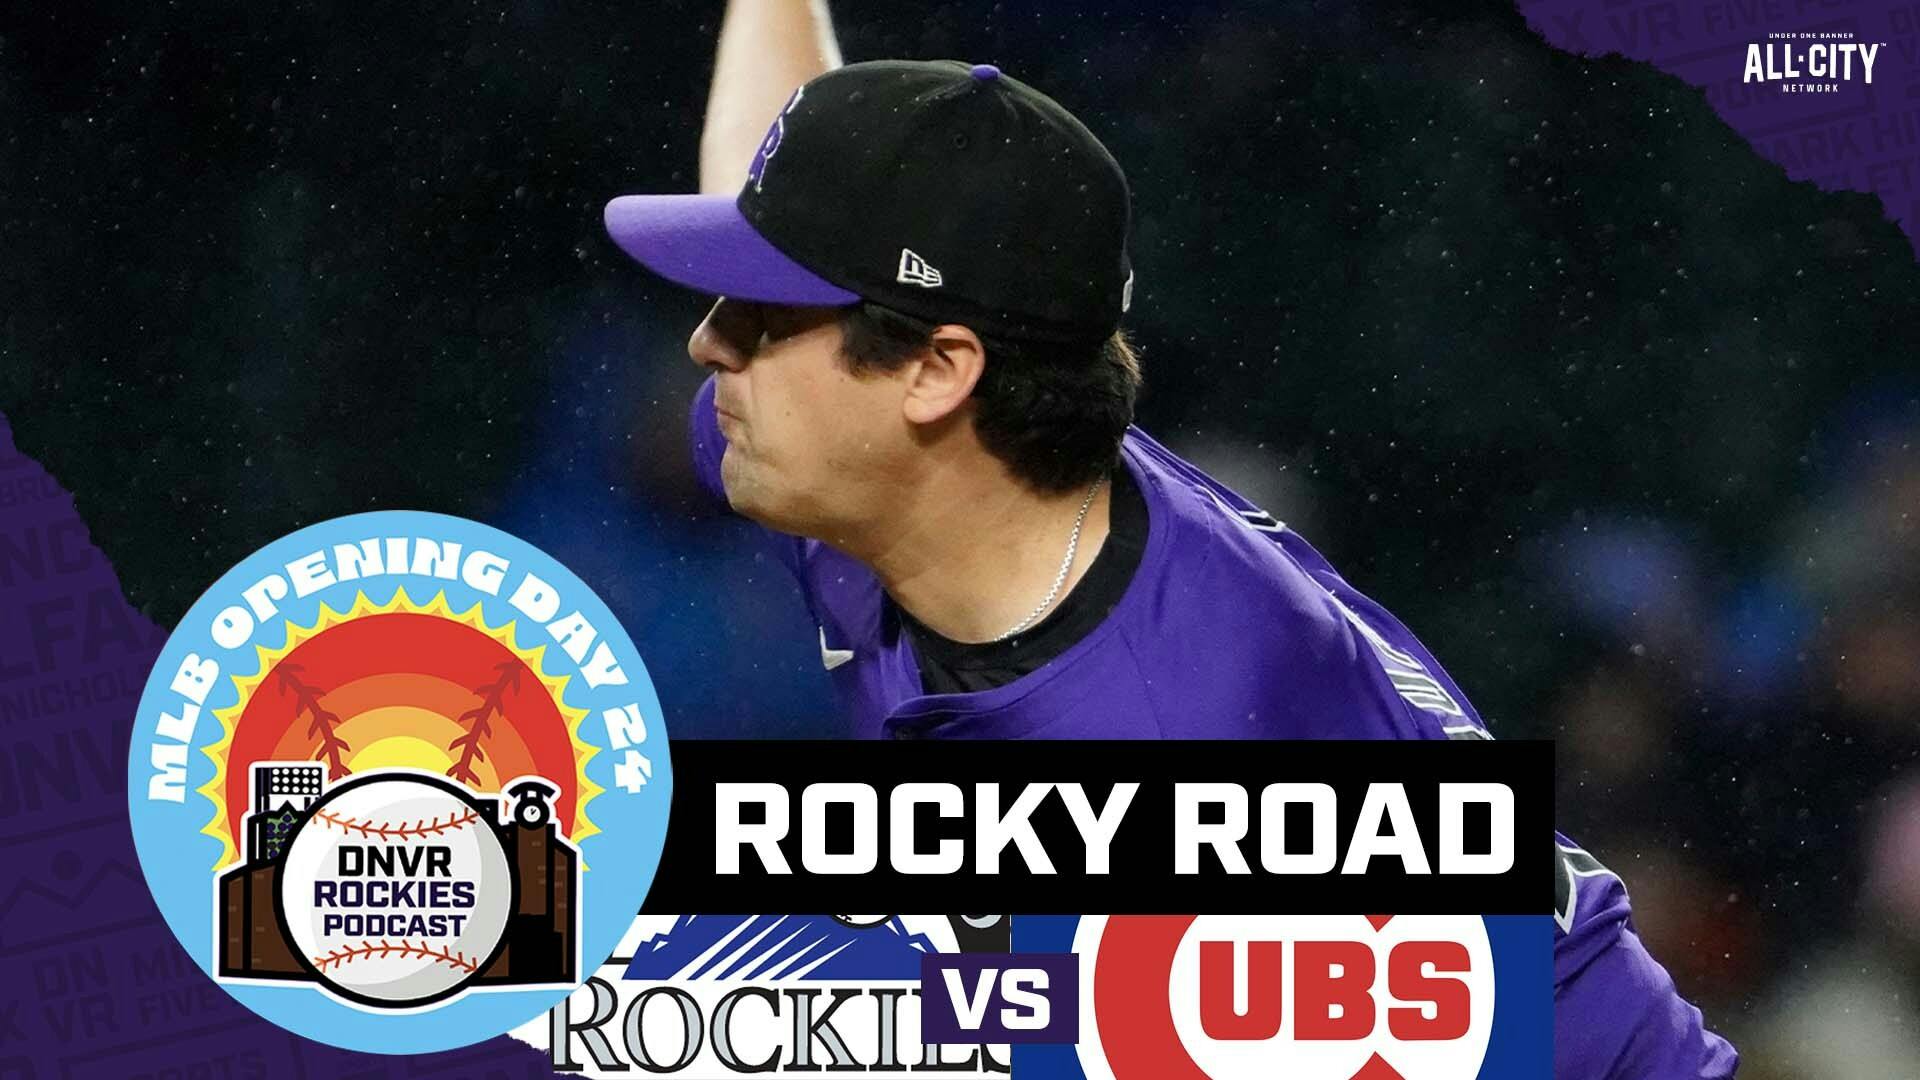 Rockies are leading MLB in some sad stats as rocky road trip comes to an end | DNVR Rockies Podcast